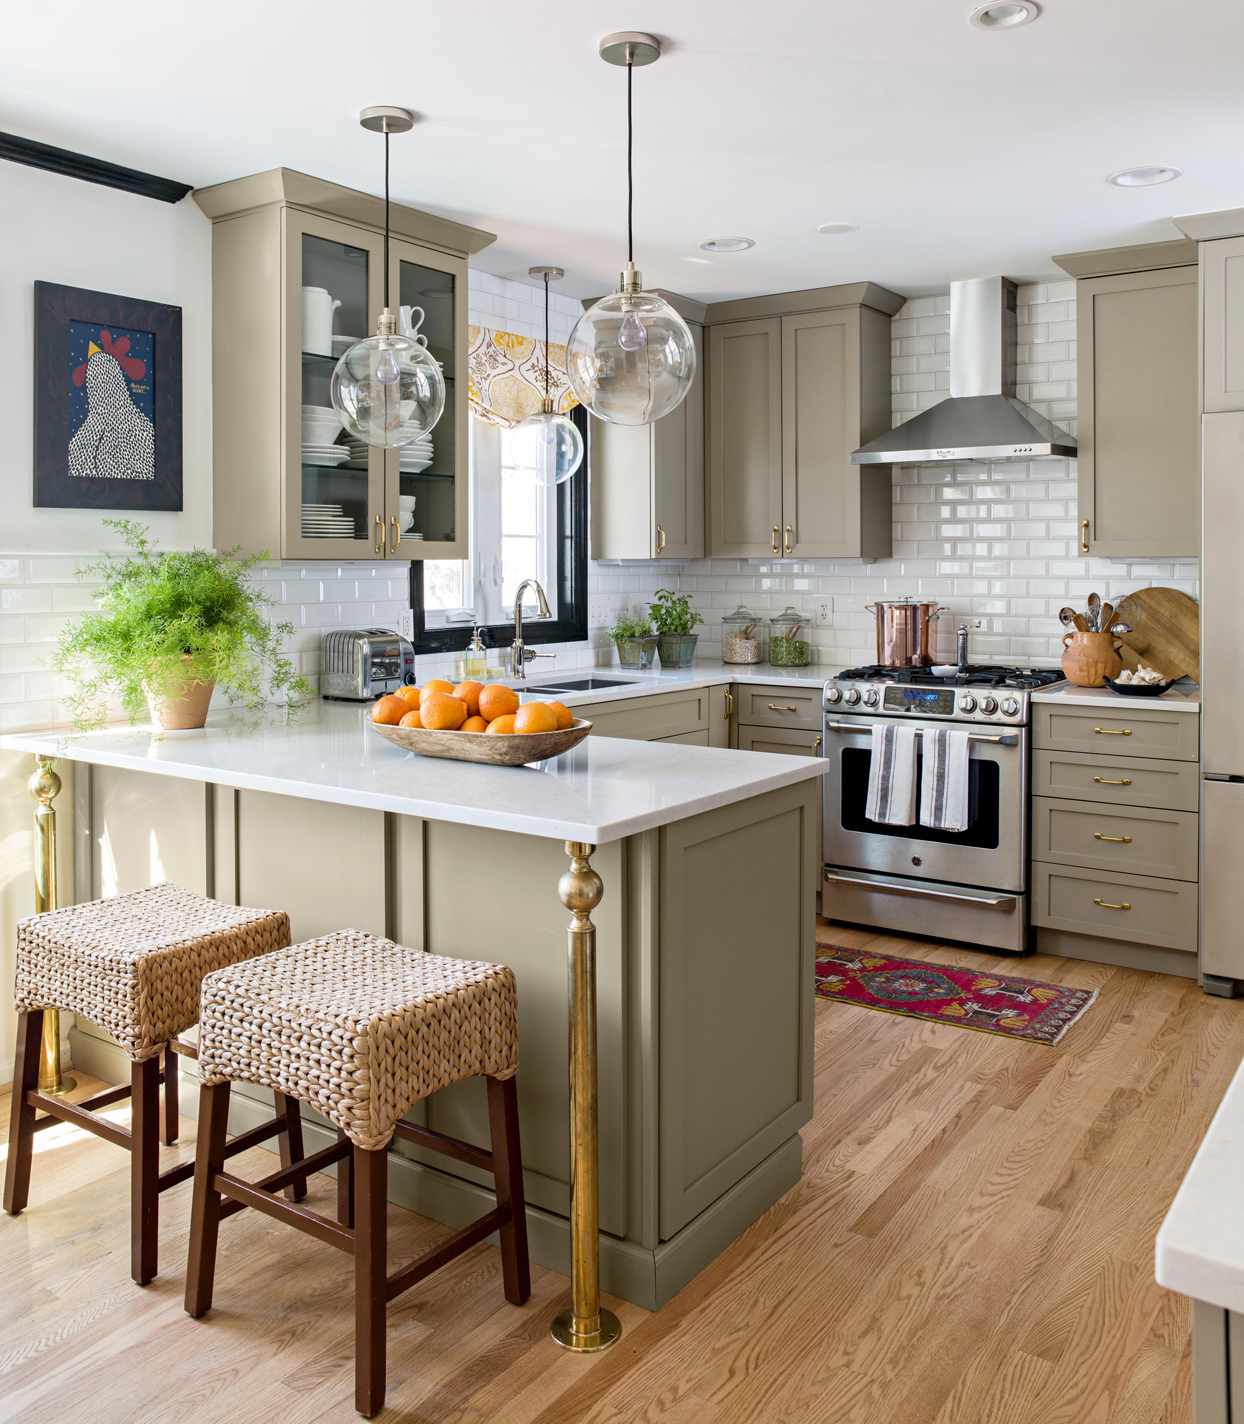 Top 2021 Kitchen Trends with LongLasting Style Better Homes & Gardens